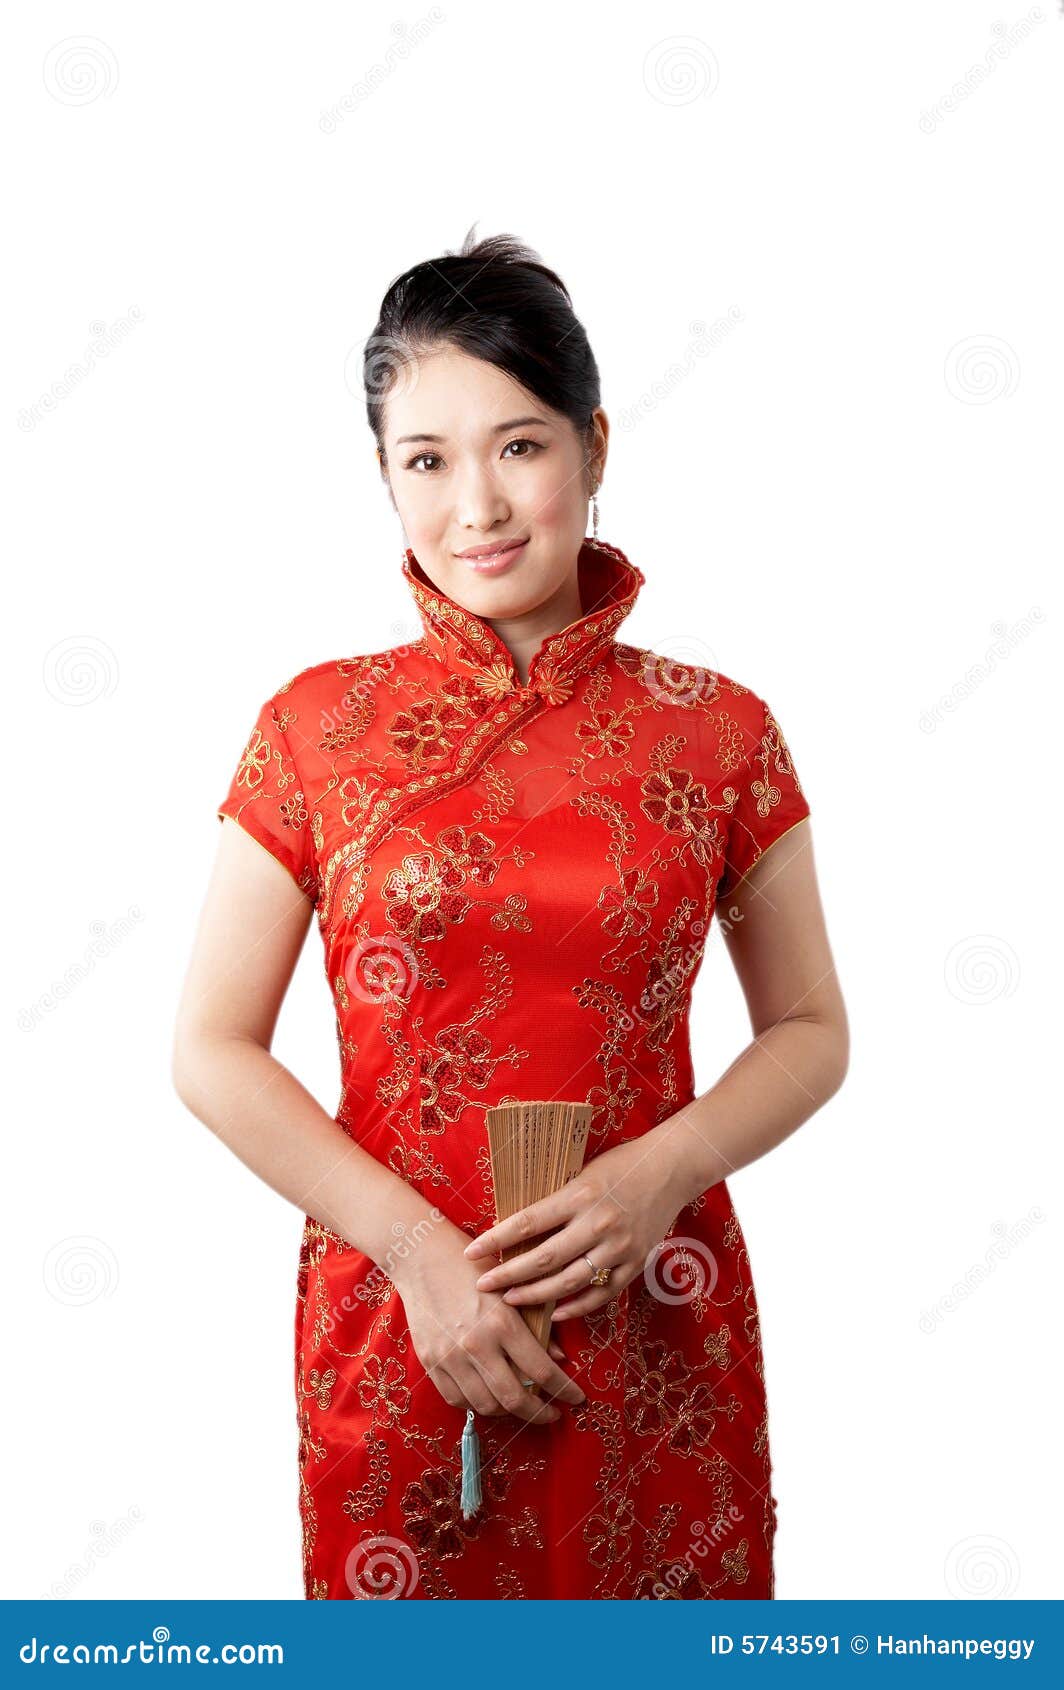 Our Asian Brides As 45